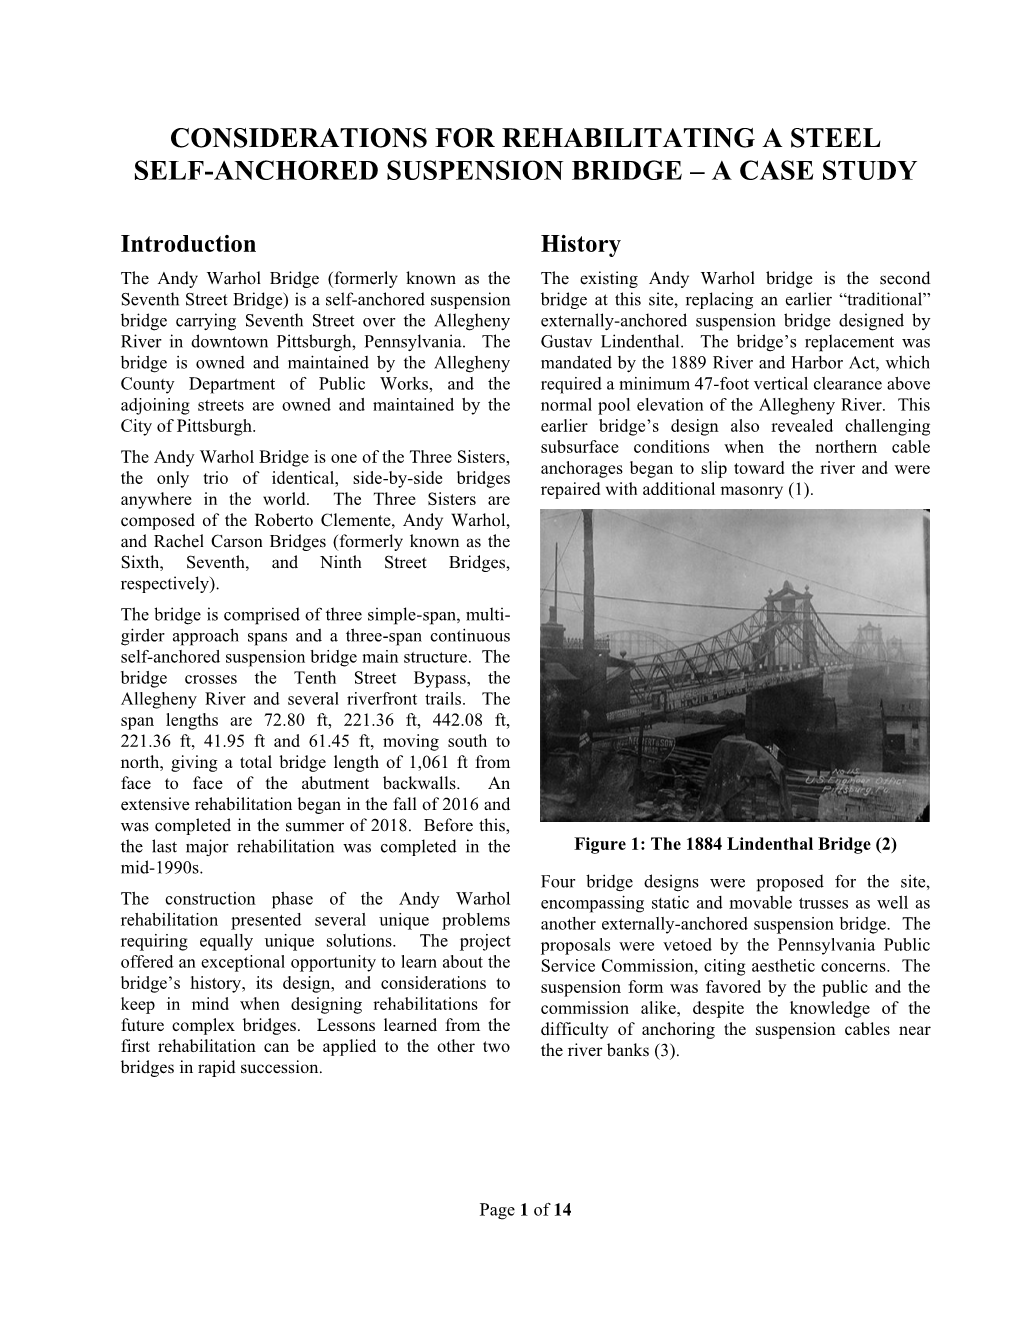 Considerations for Rehabilitating a Steel Self-Anchored Suspension Bridge – a Case Study